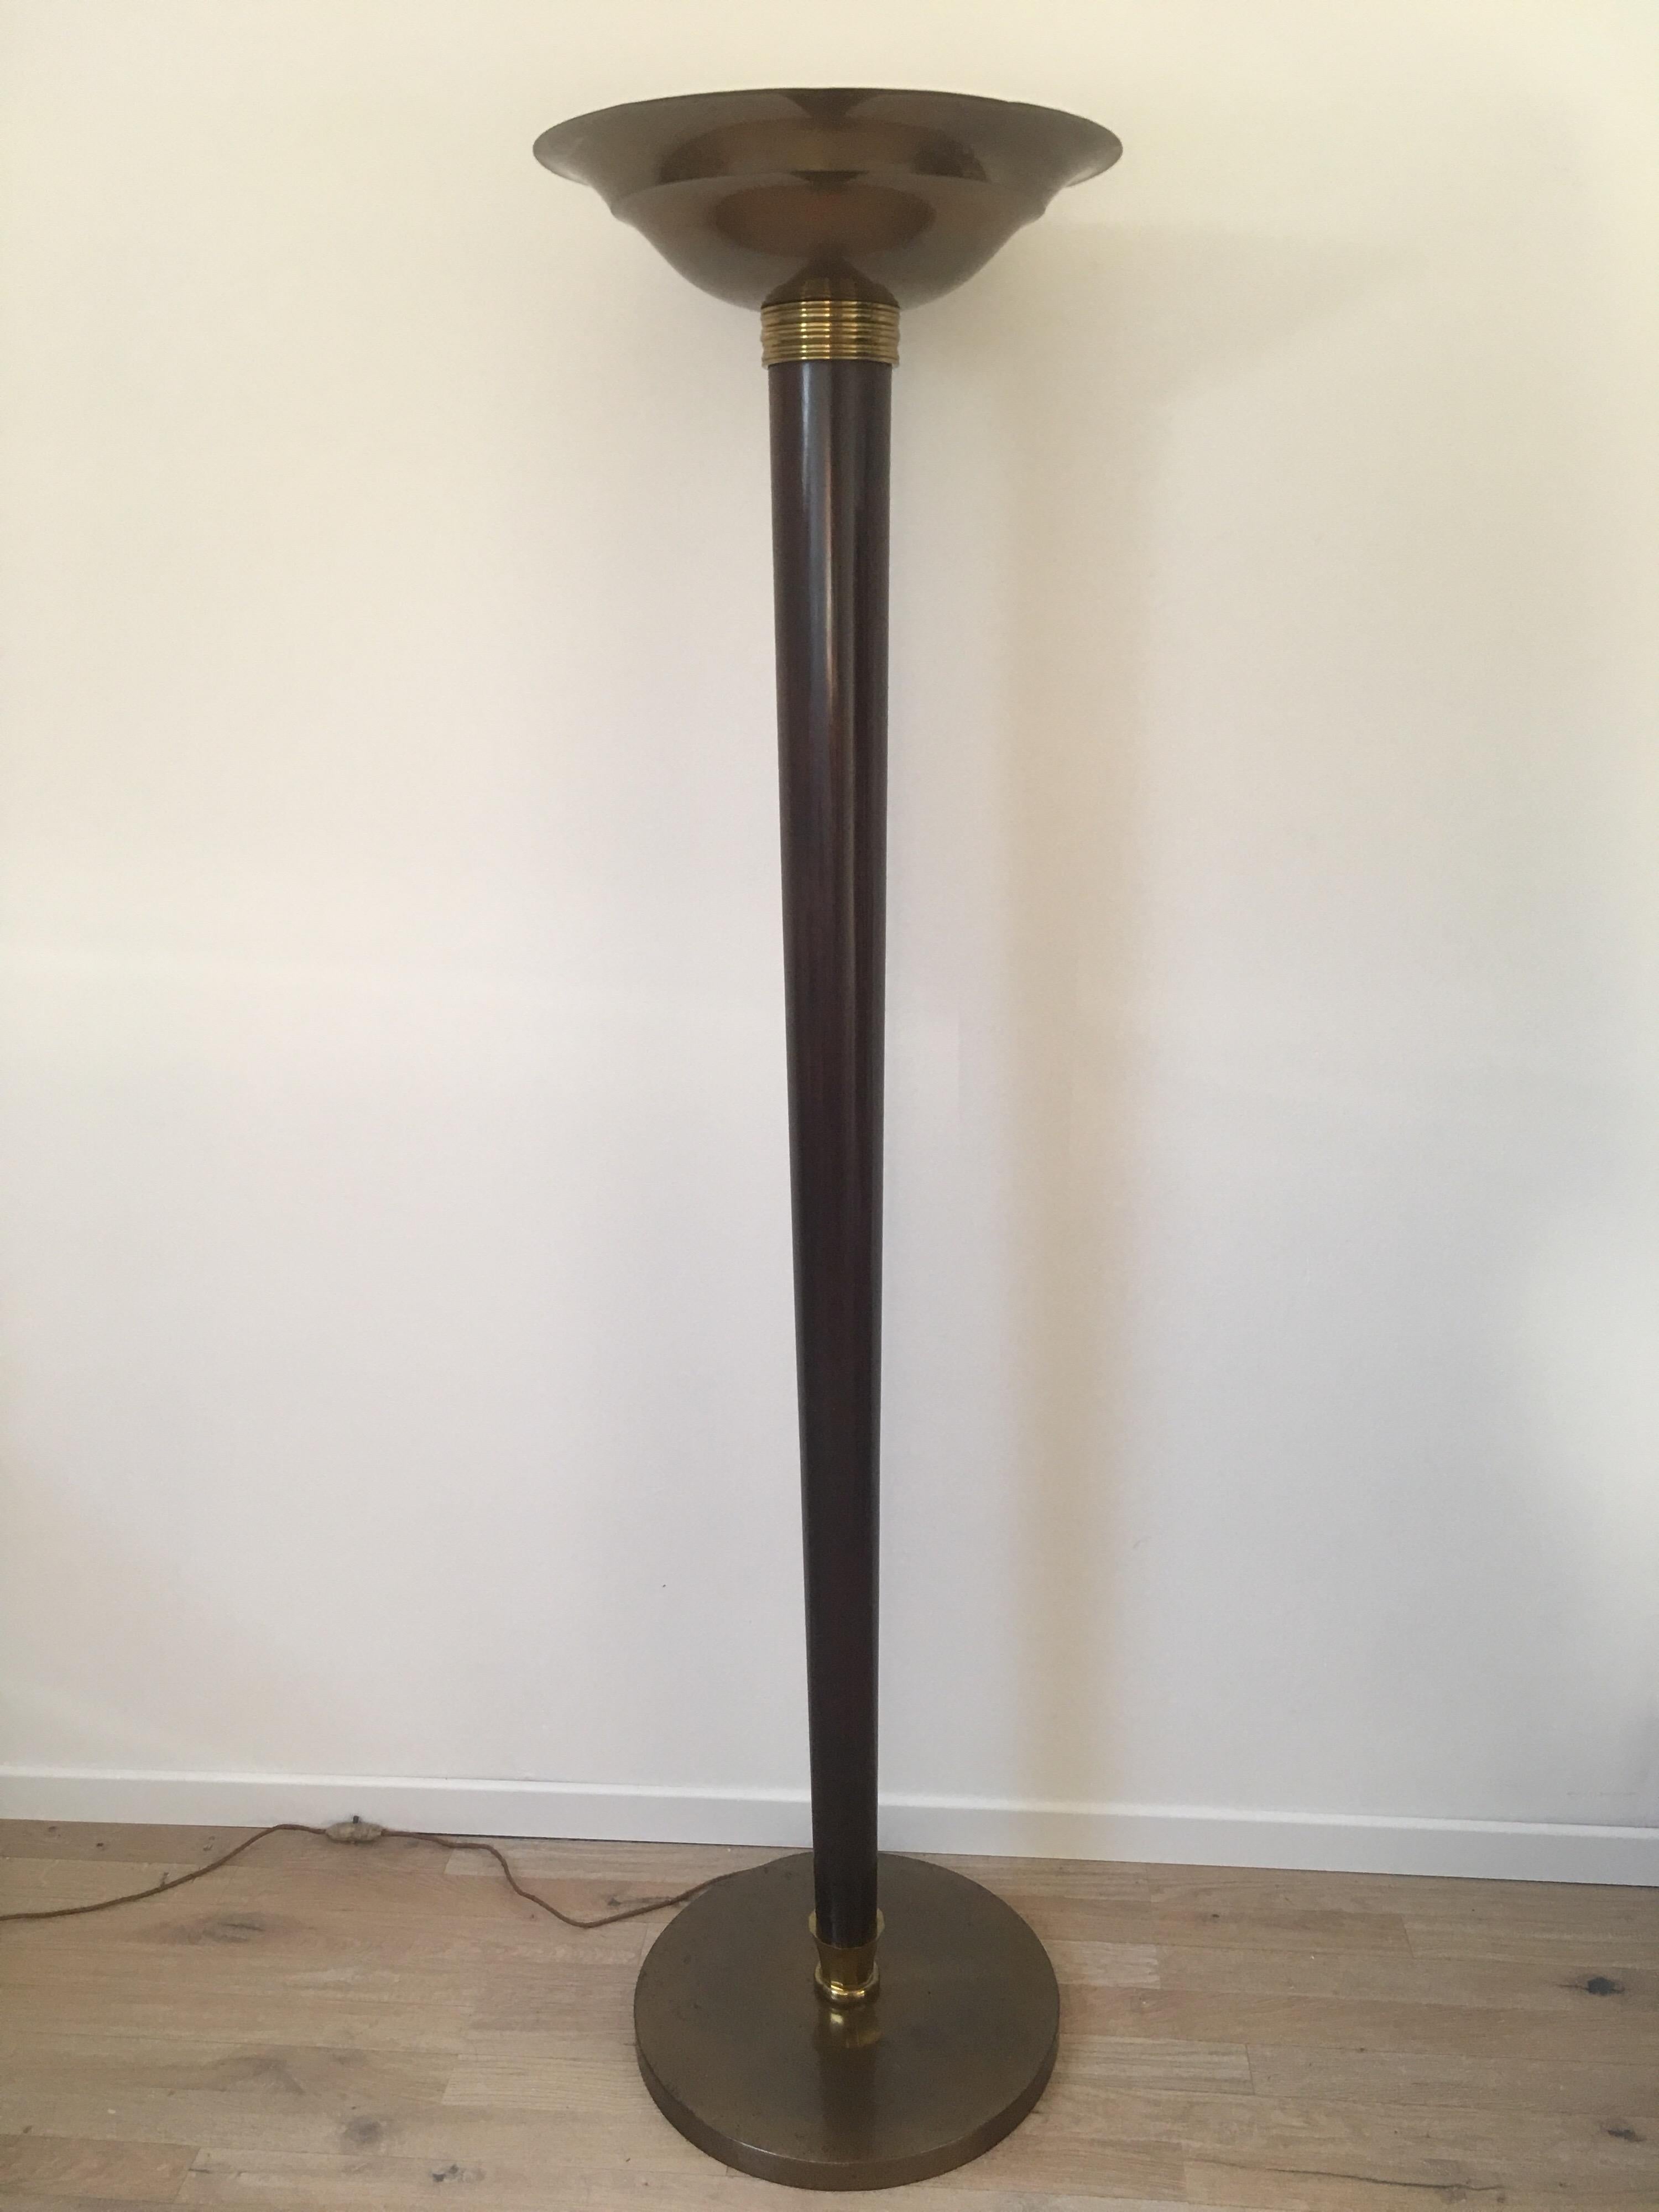 Bronzed Genet et Michon Art Deco Floor Lamp in Wood and Brass, French, 1930s For Sale